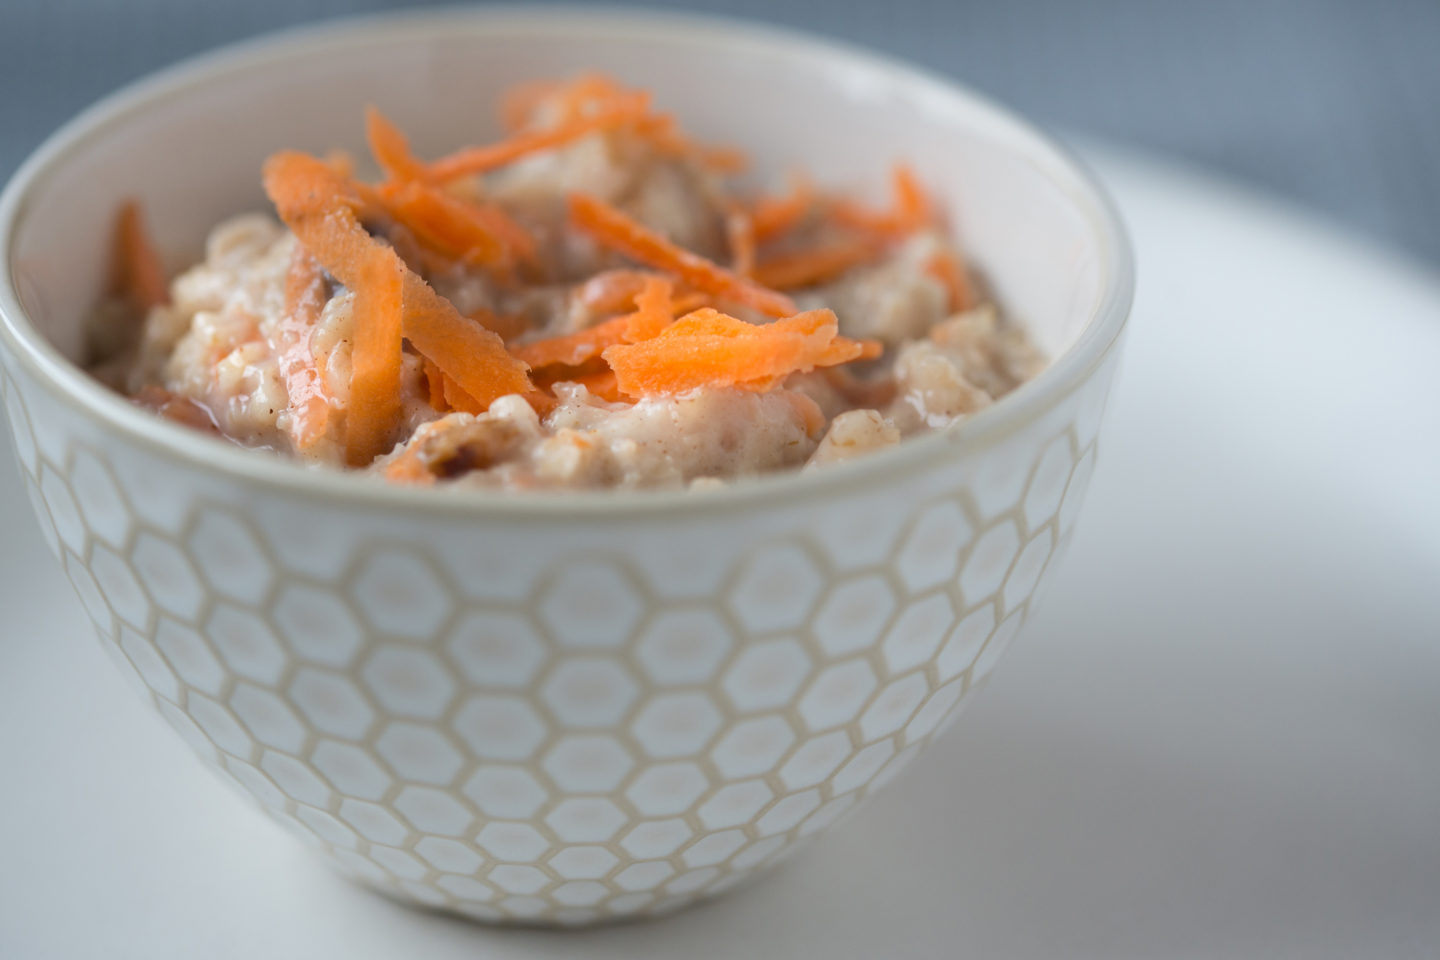 a small bowl of porridge with carrot on top